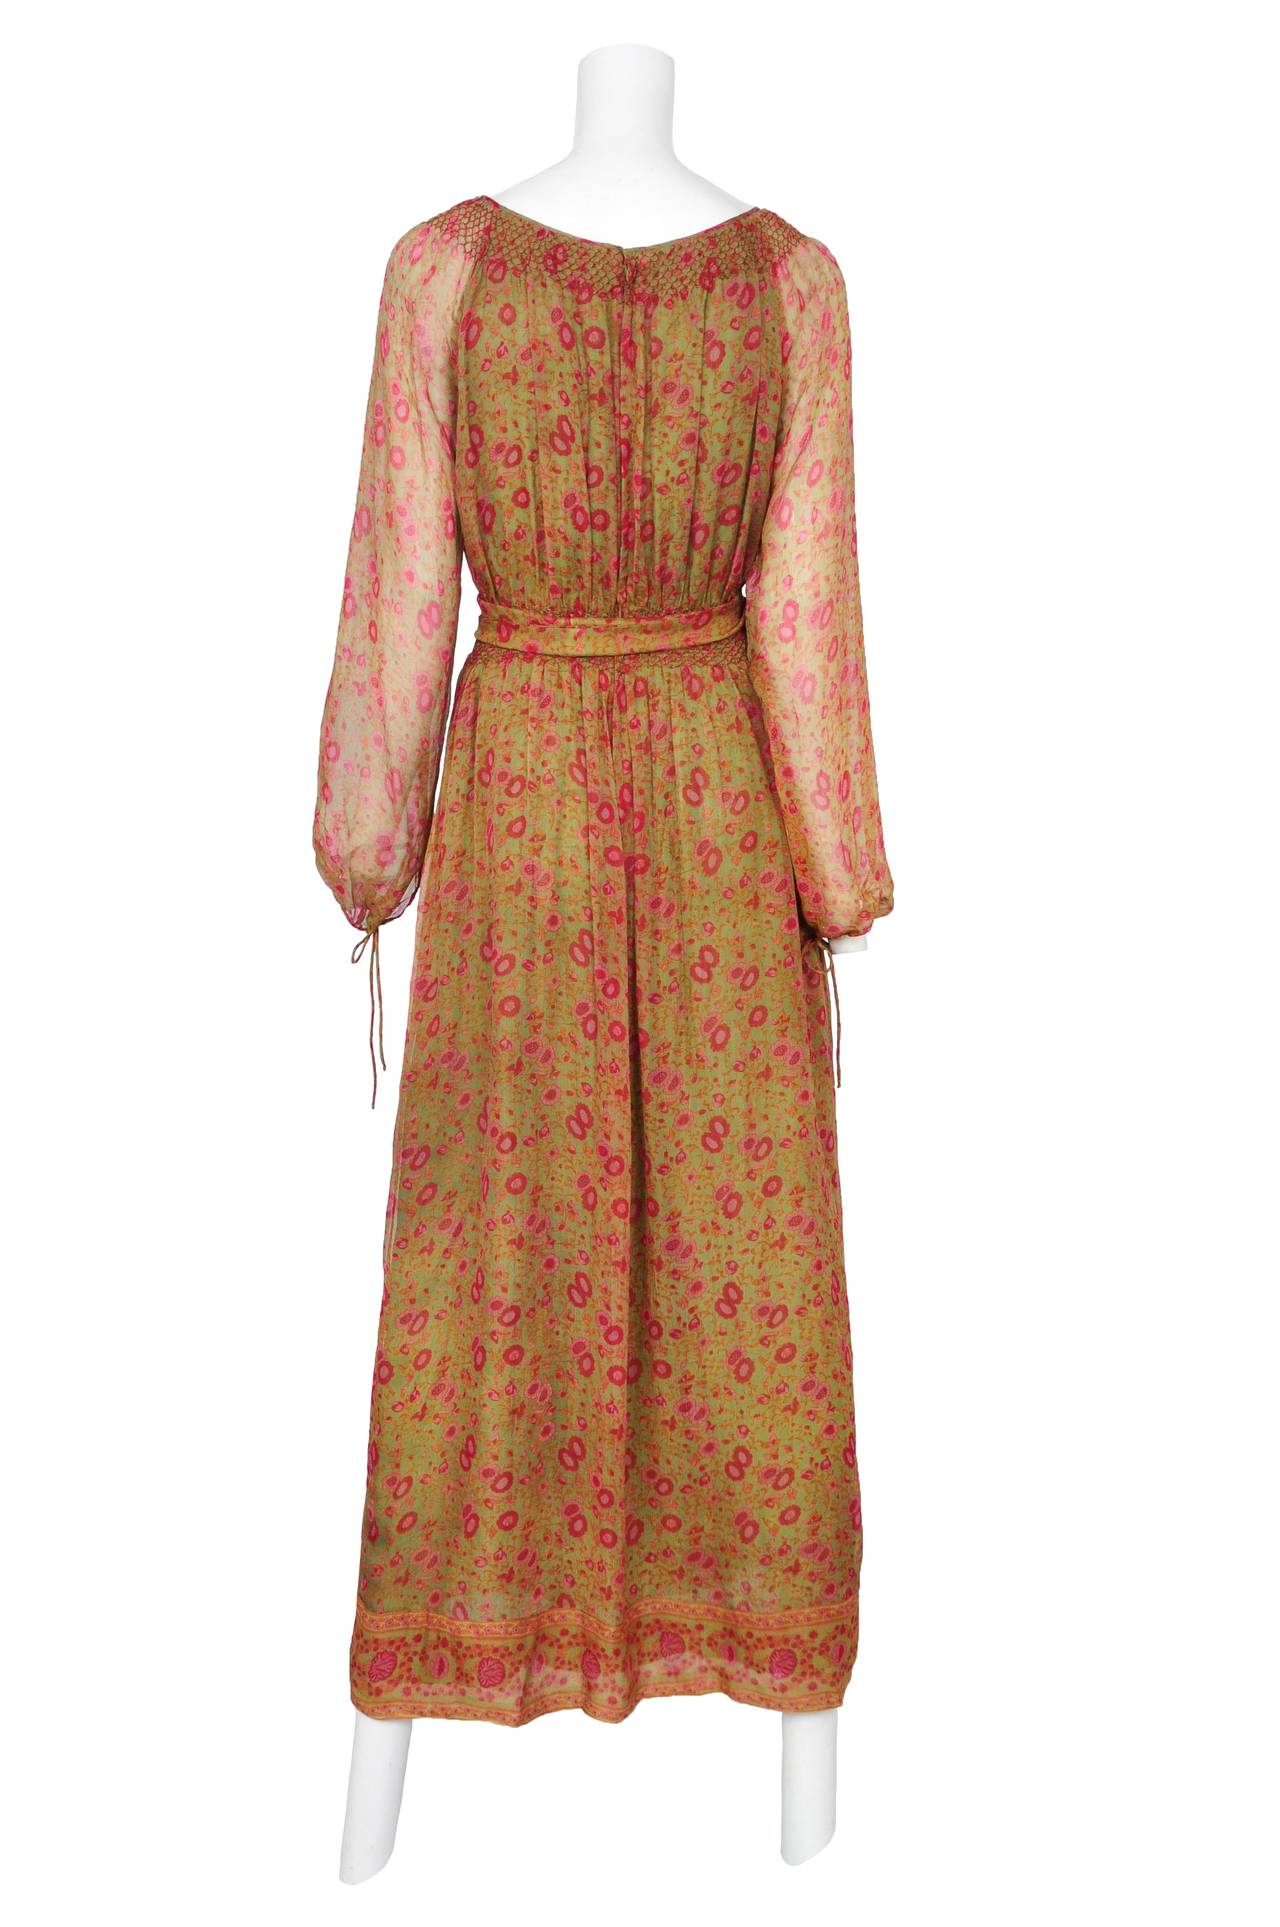 Vintage Treacy Lowe olive green silk chiffon peasant dress featuring a pink & berry floral print and smocking at neckline and waist band.